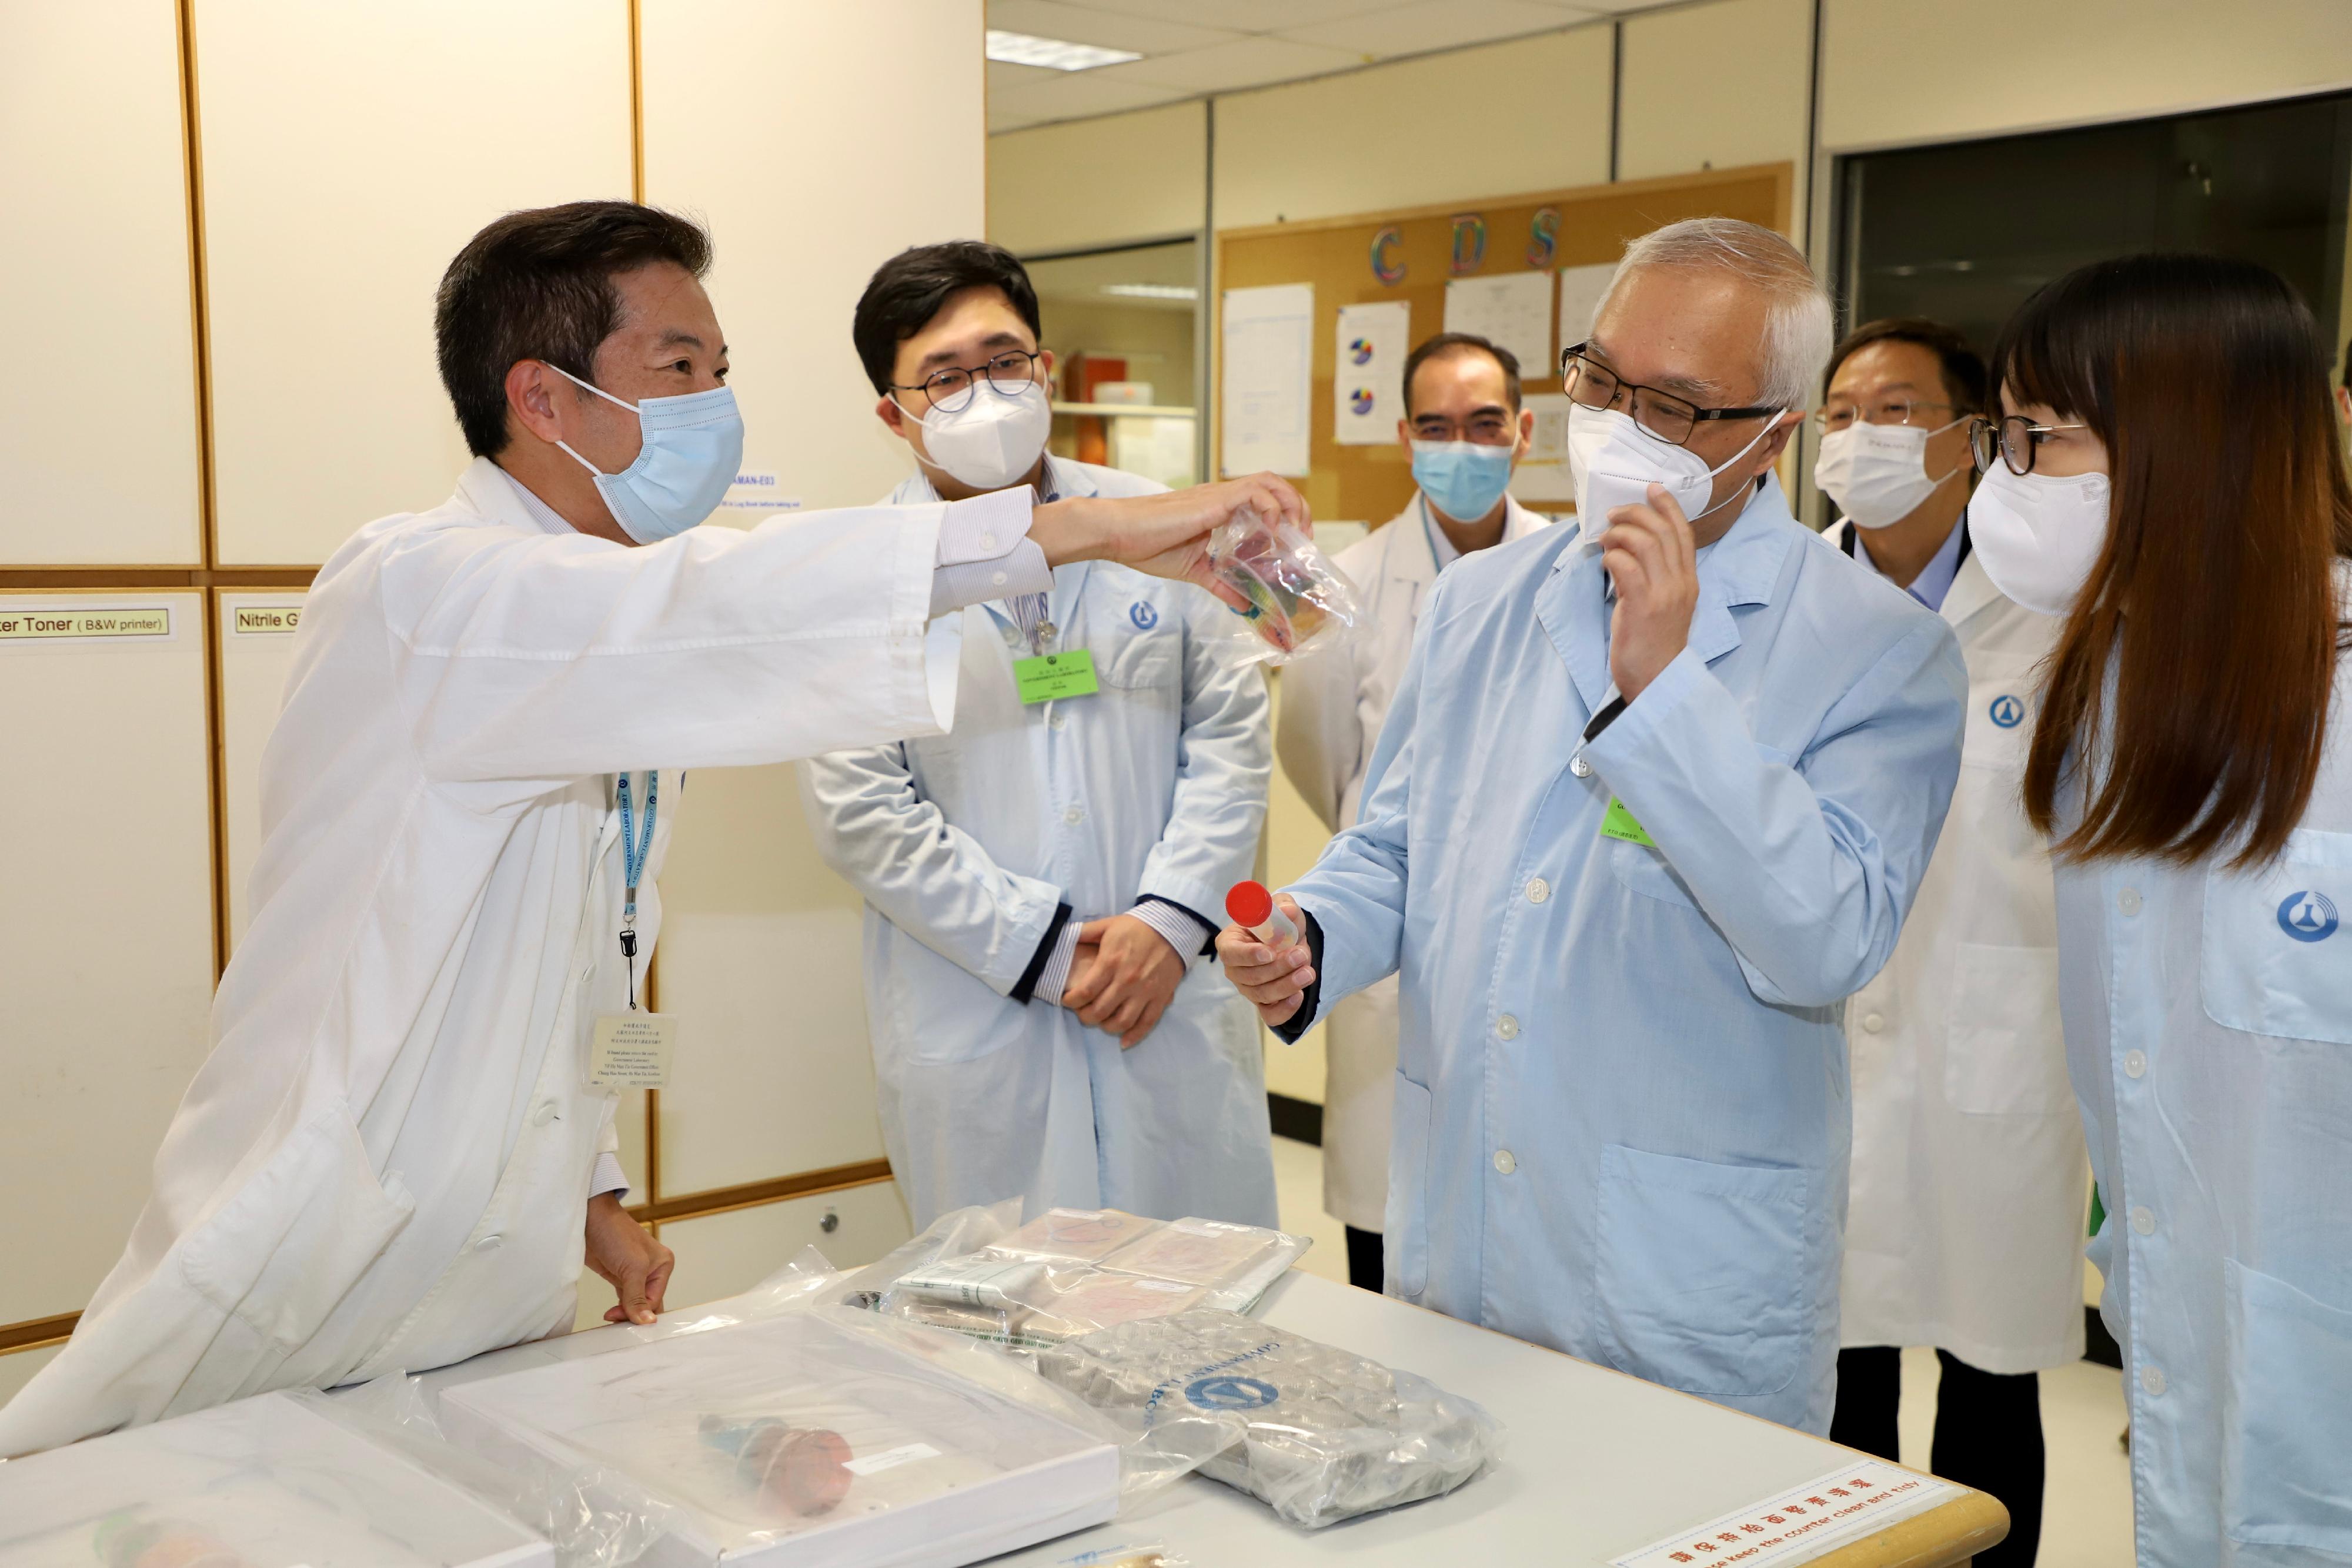 The Secretary for Environment and Ecology, Mr Tse Chin-wan, today (November 29) visited the Government Laboratory to learn more about the work of the department. Photo shows Mr Tse (second right), visiting the Controlled Drugs Sections to gain a better understanding on the comprehensive controlled drug examination services provided by their professional staff in assisting law enforcement agencies.